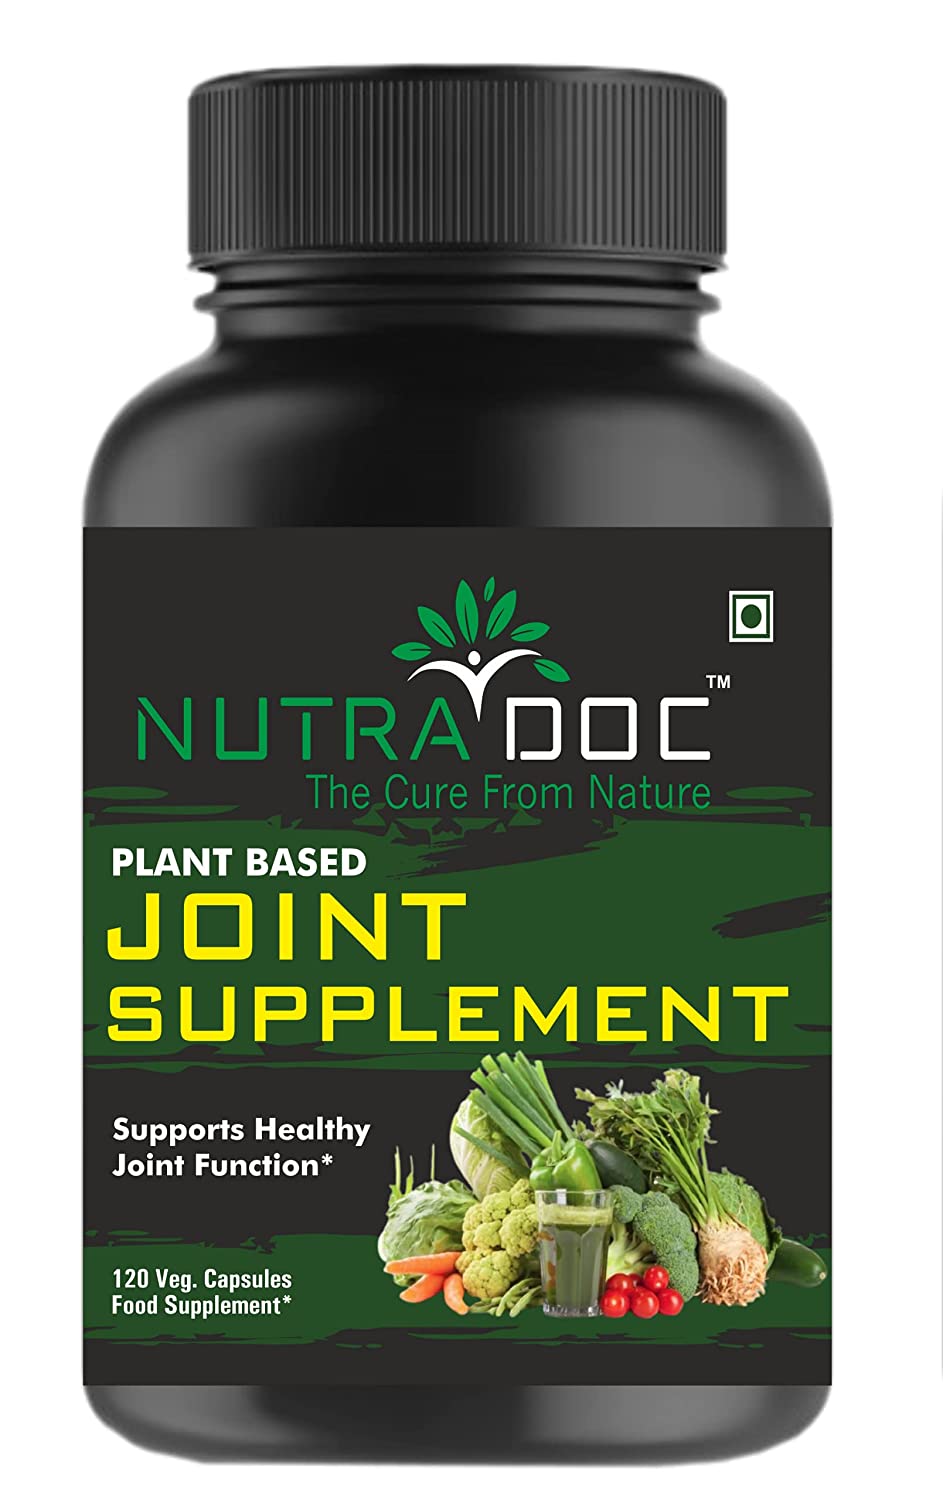 Nutradoc Plant Based Joint Supplement Image